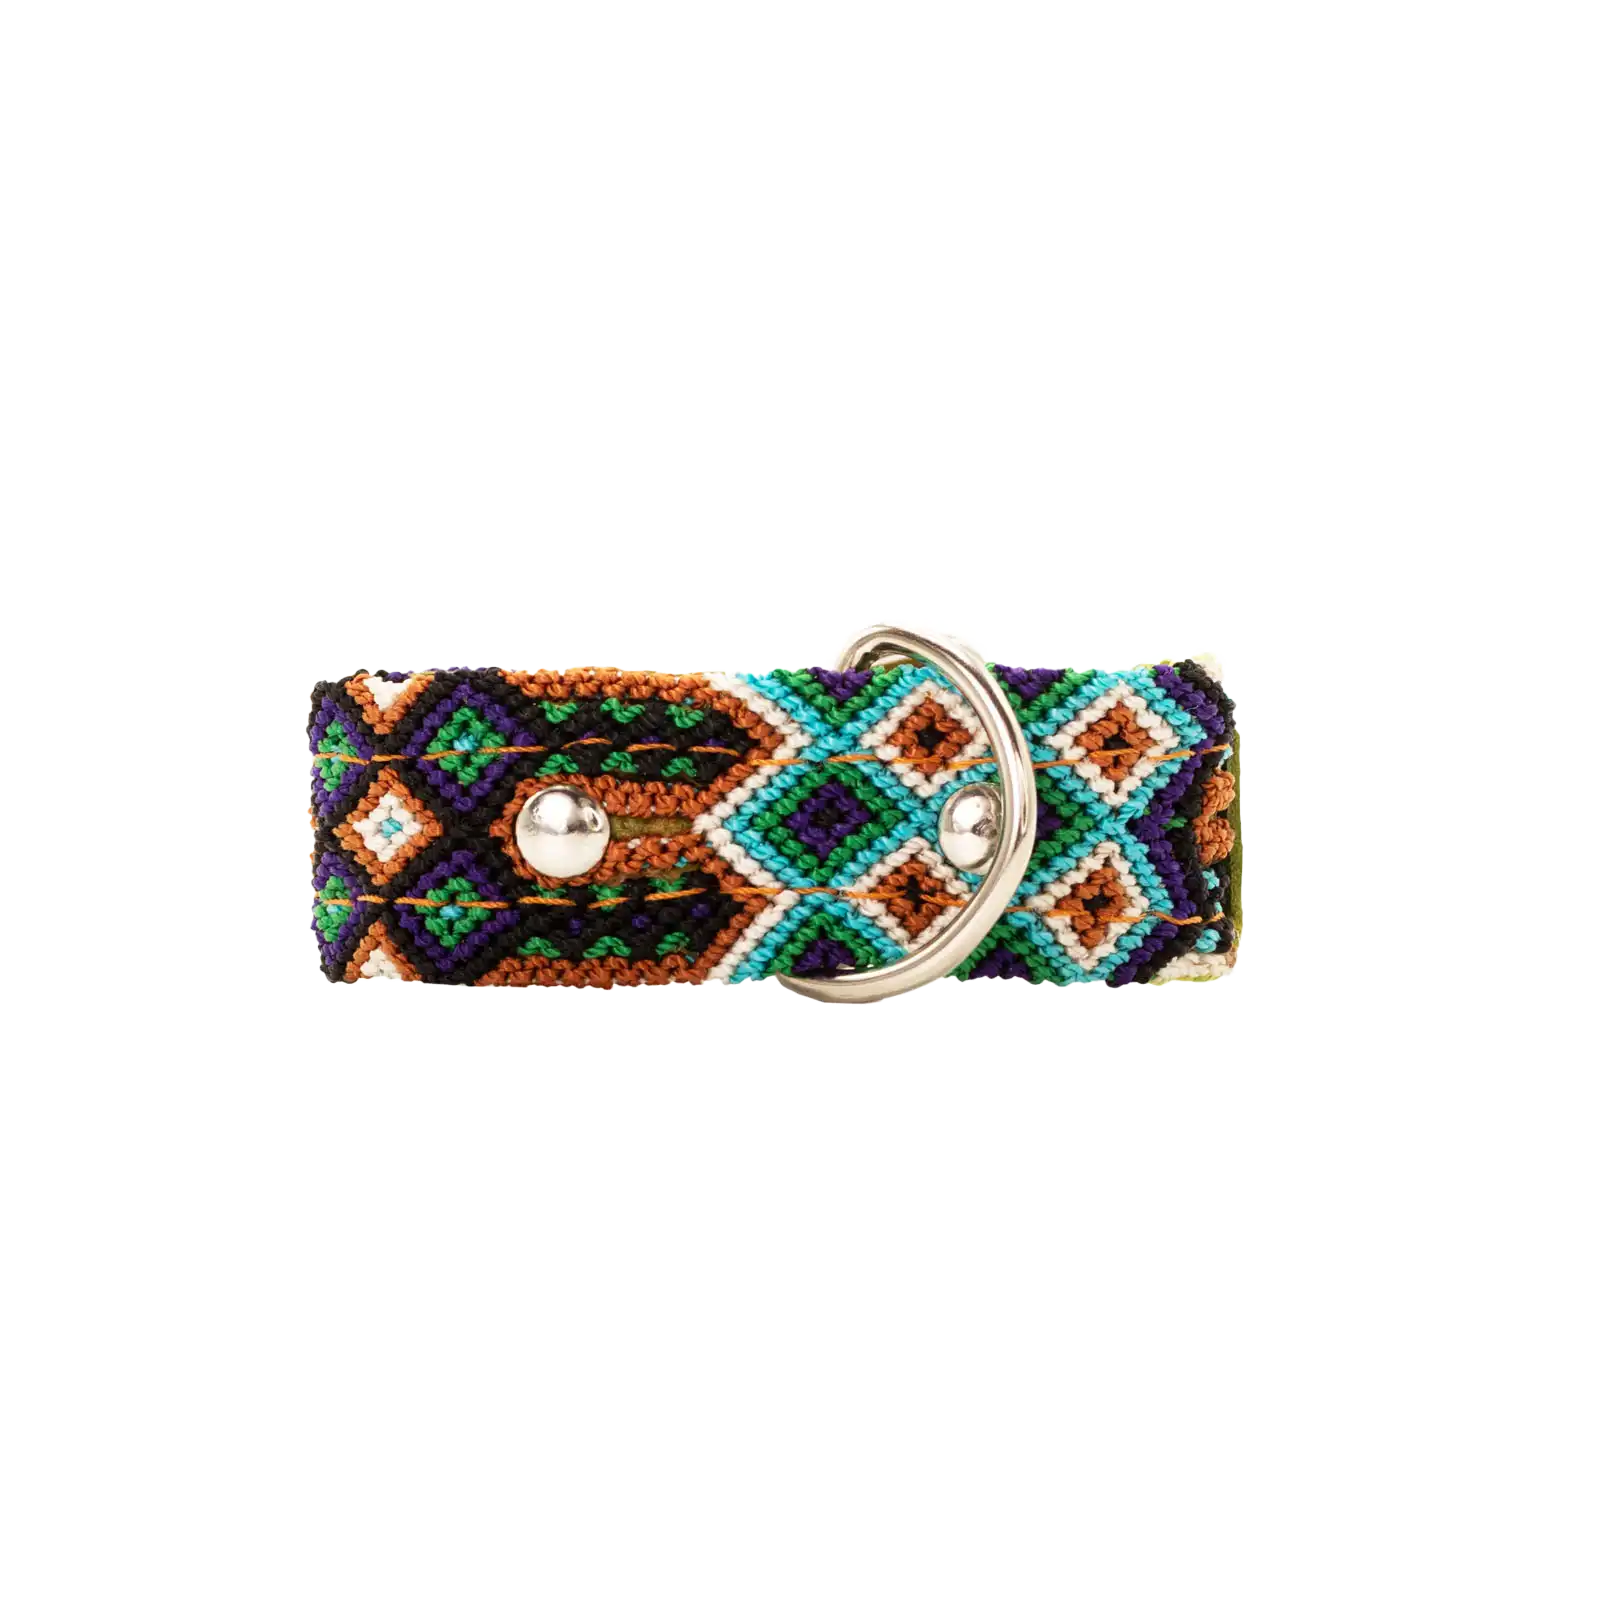 Handcrafted dog collar with a charming blend of textures and patterns